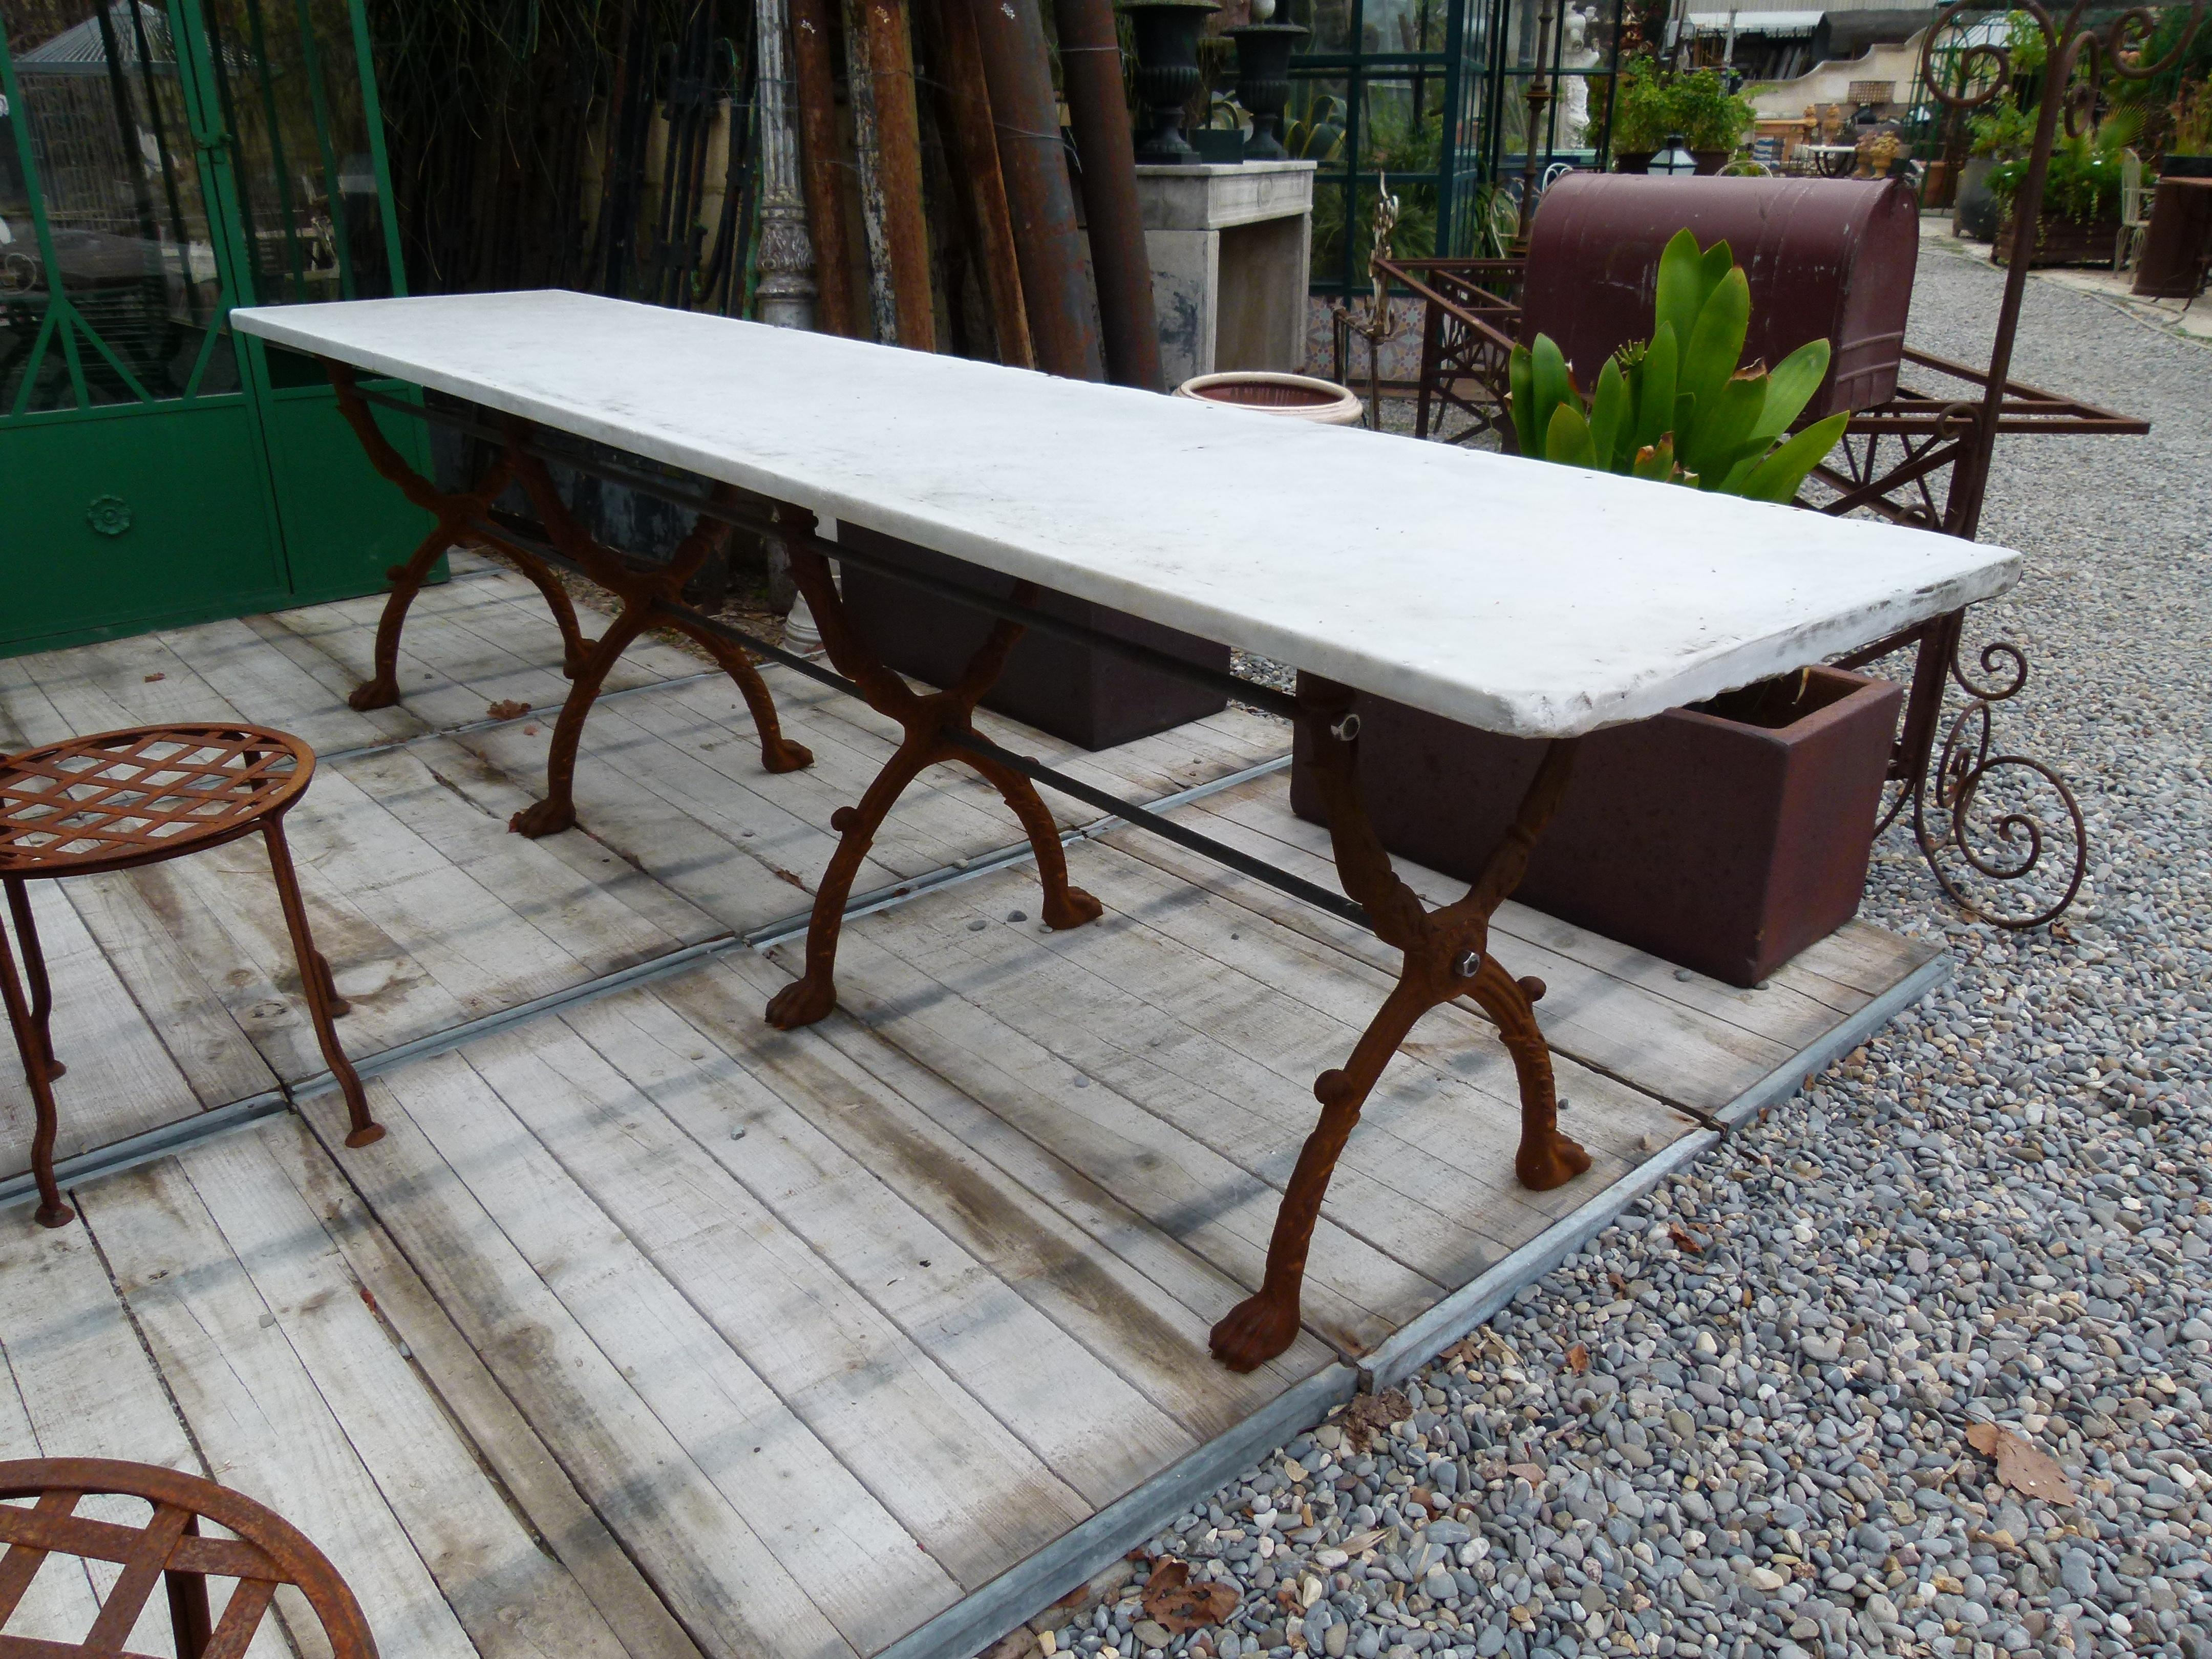 20th century large white Carrara marble garden table on a stable cast iron base.